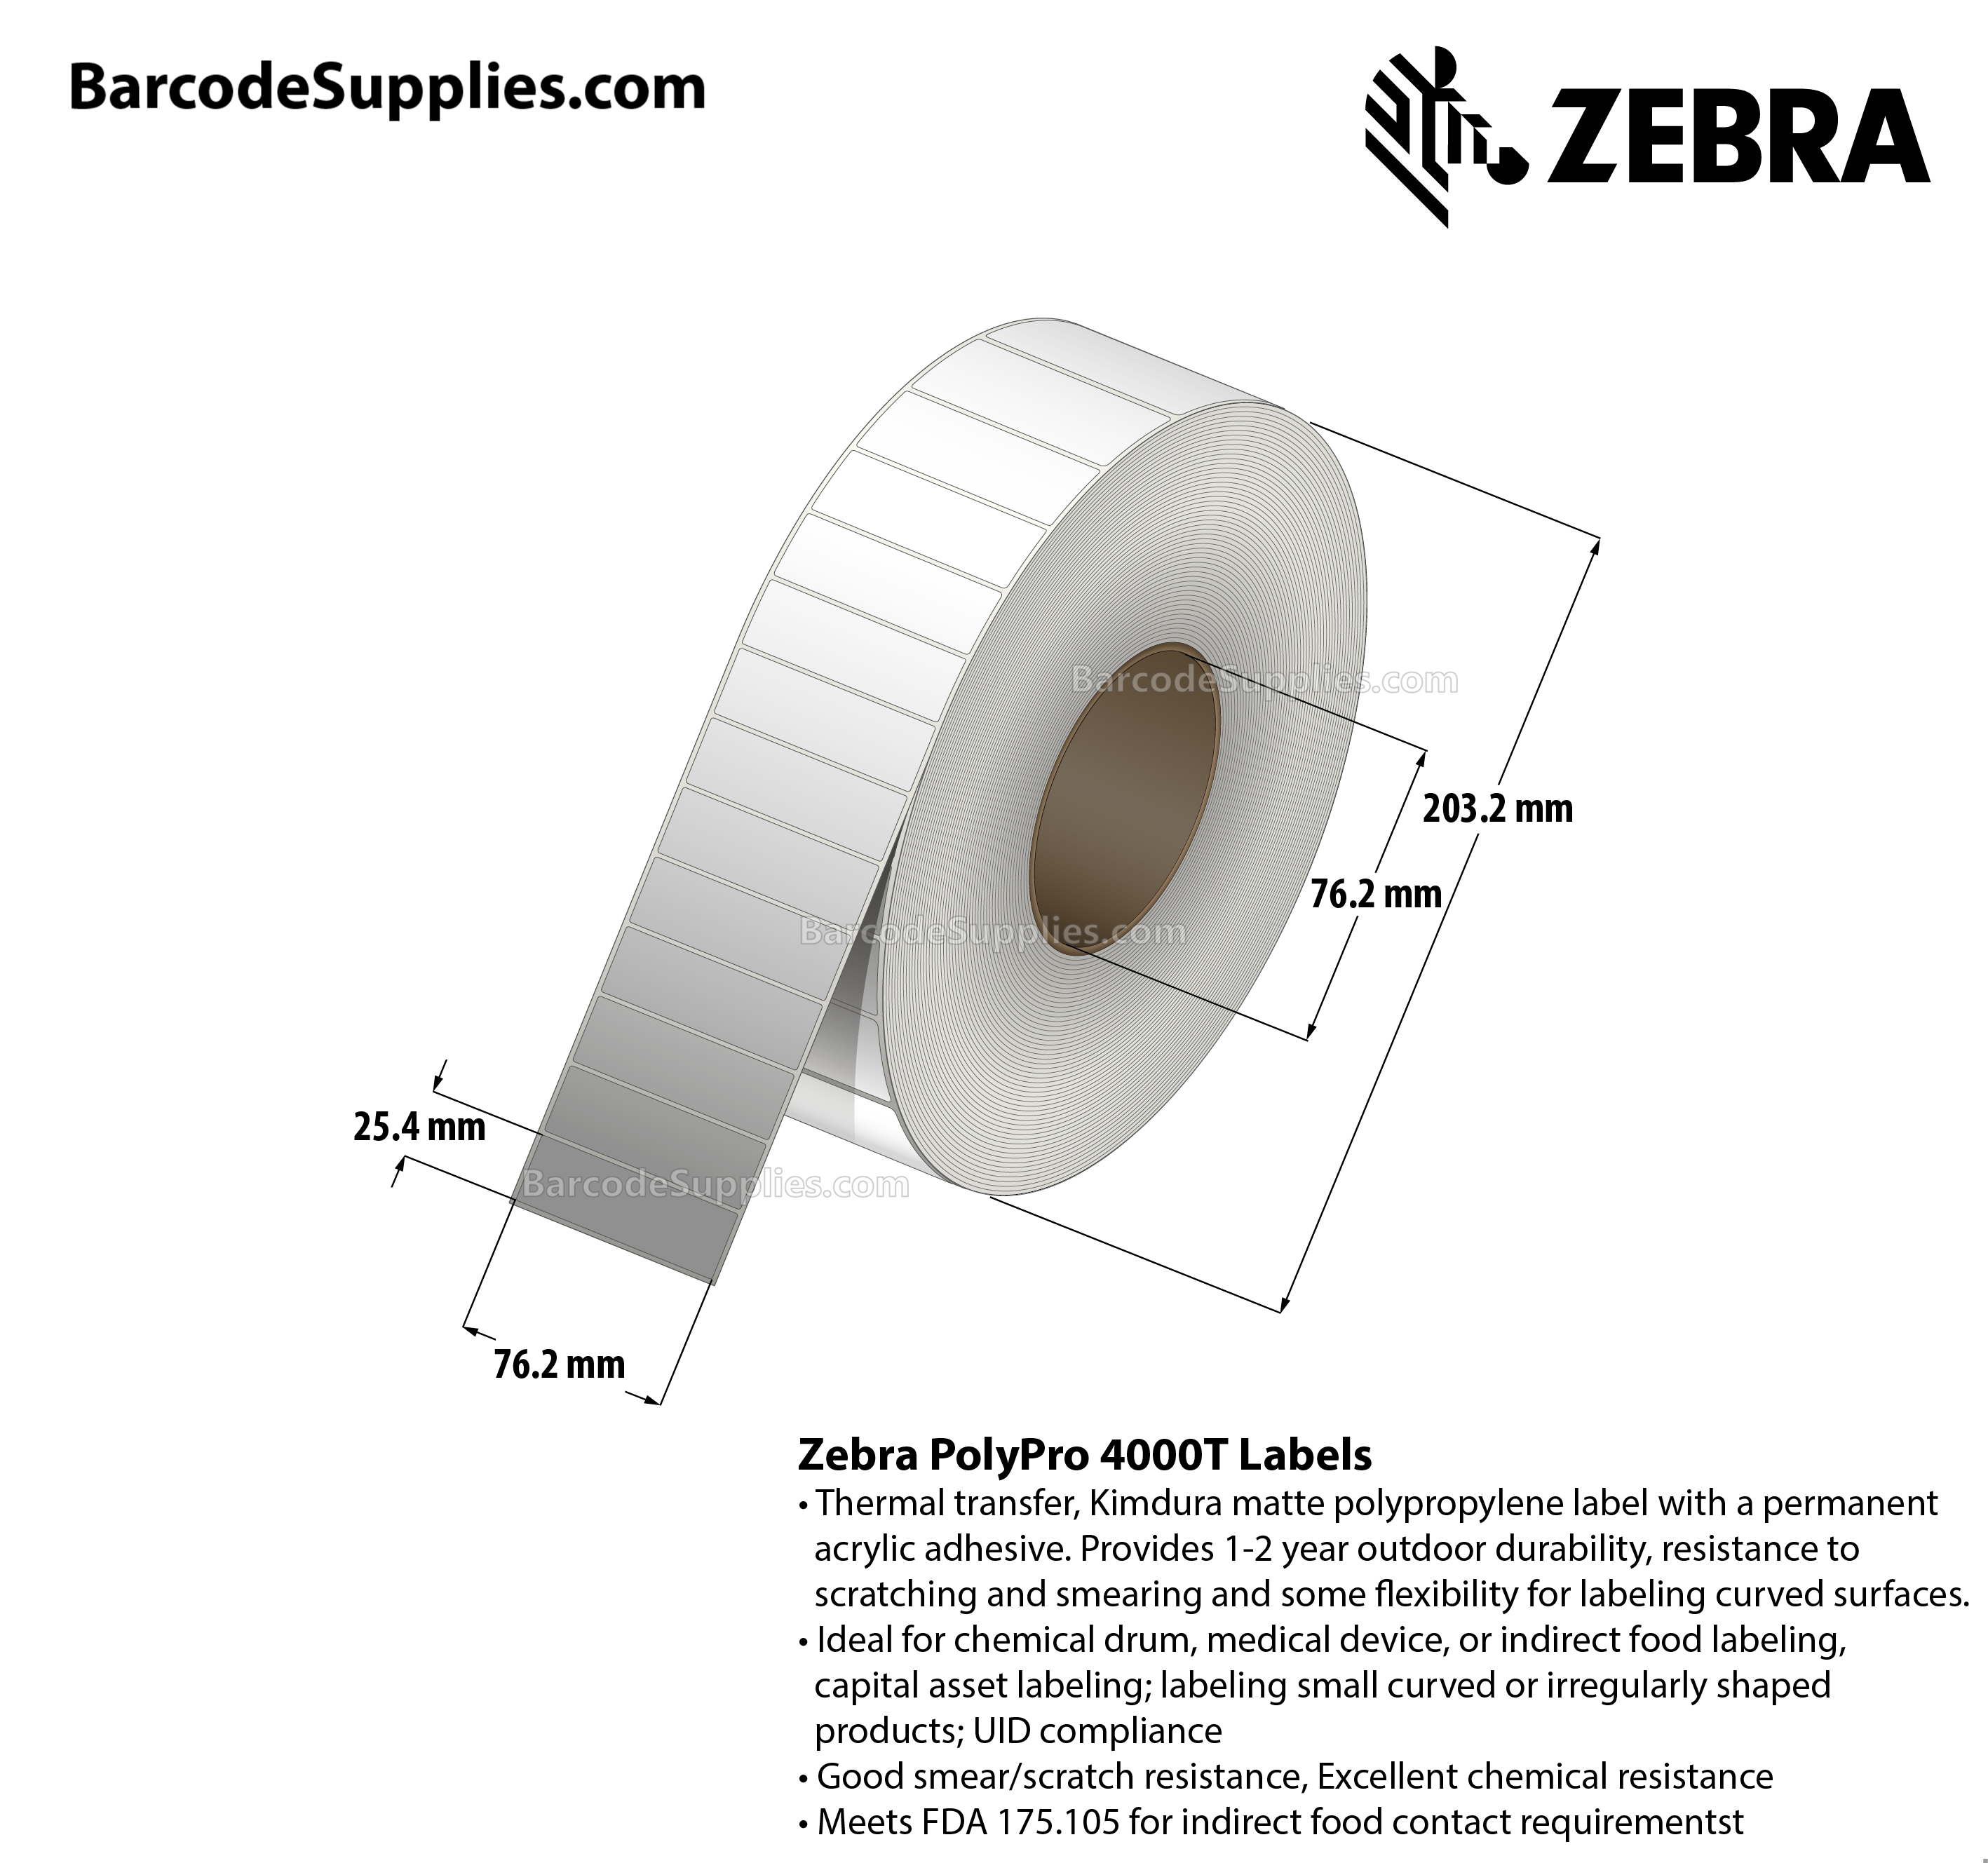 3 x 1 Thermal Transfer White PolyPro 4000T Labels With Permanent Adhesive - Not Perforated - 4350 Labels Per Roll - Carton Of 4 Rolls - 17400 Labels Total - MPN: 10011688